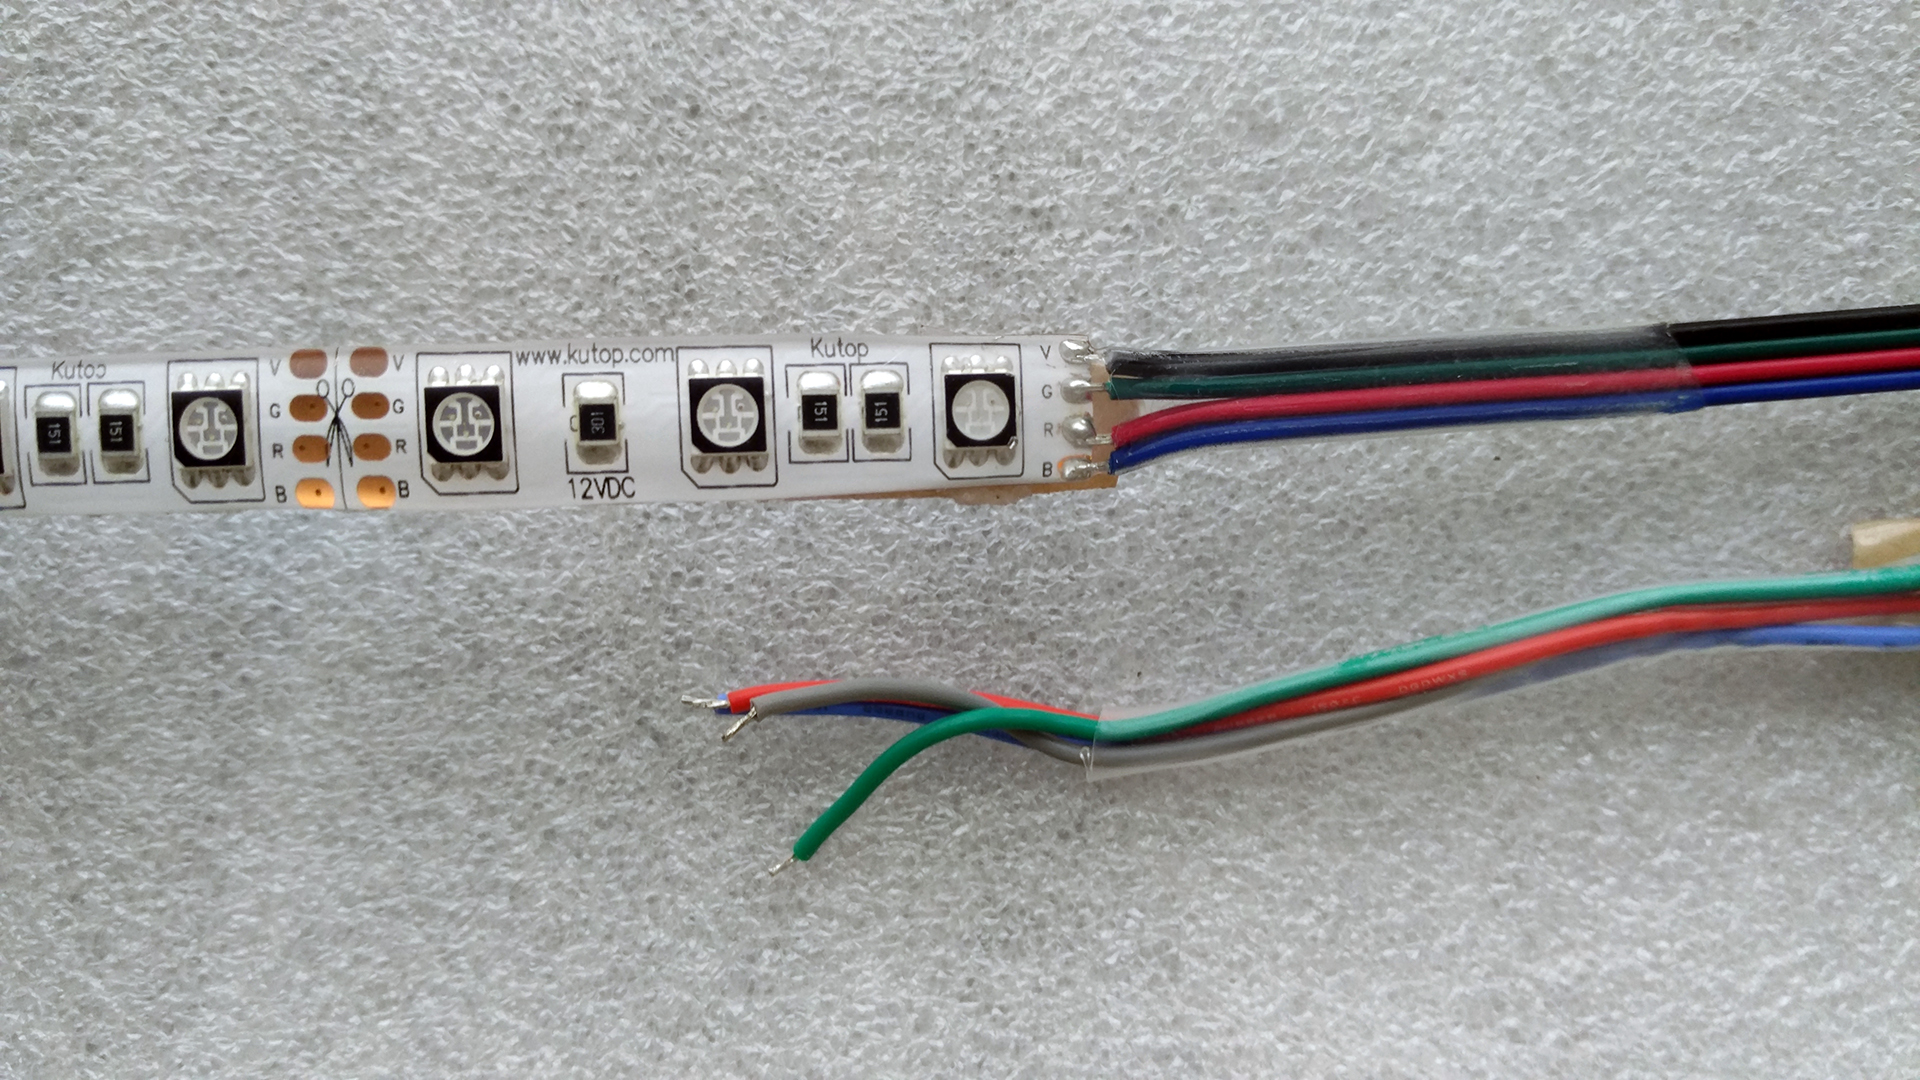 Kutop high quality RGB 5050 LED strip output wires